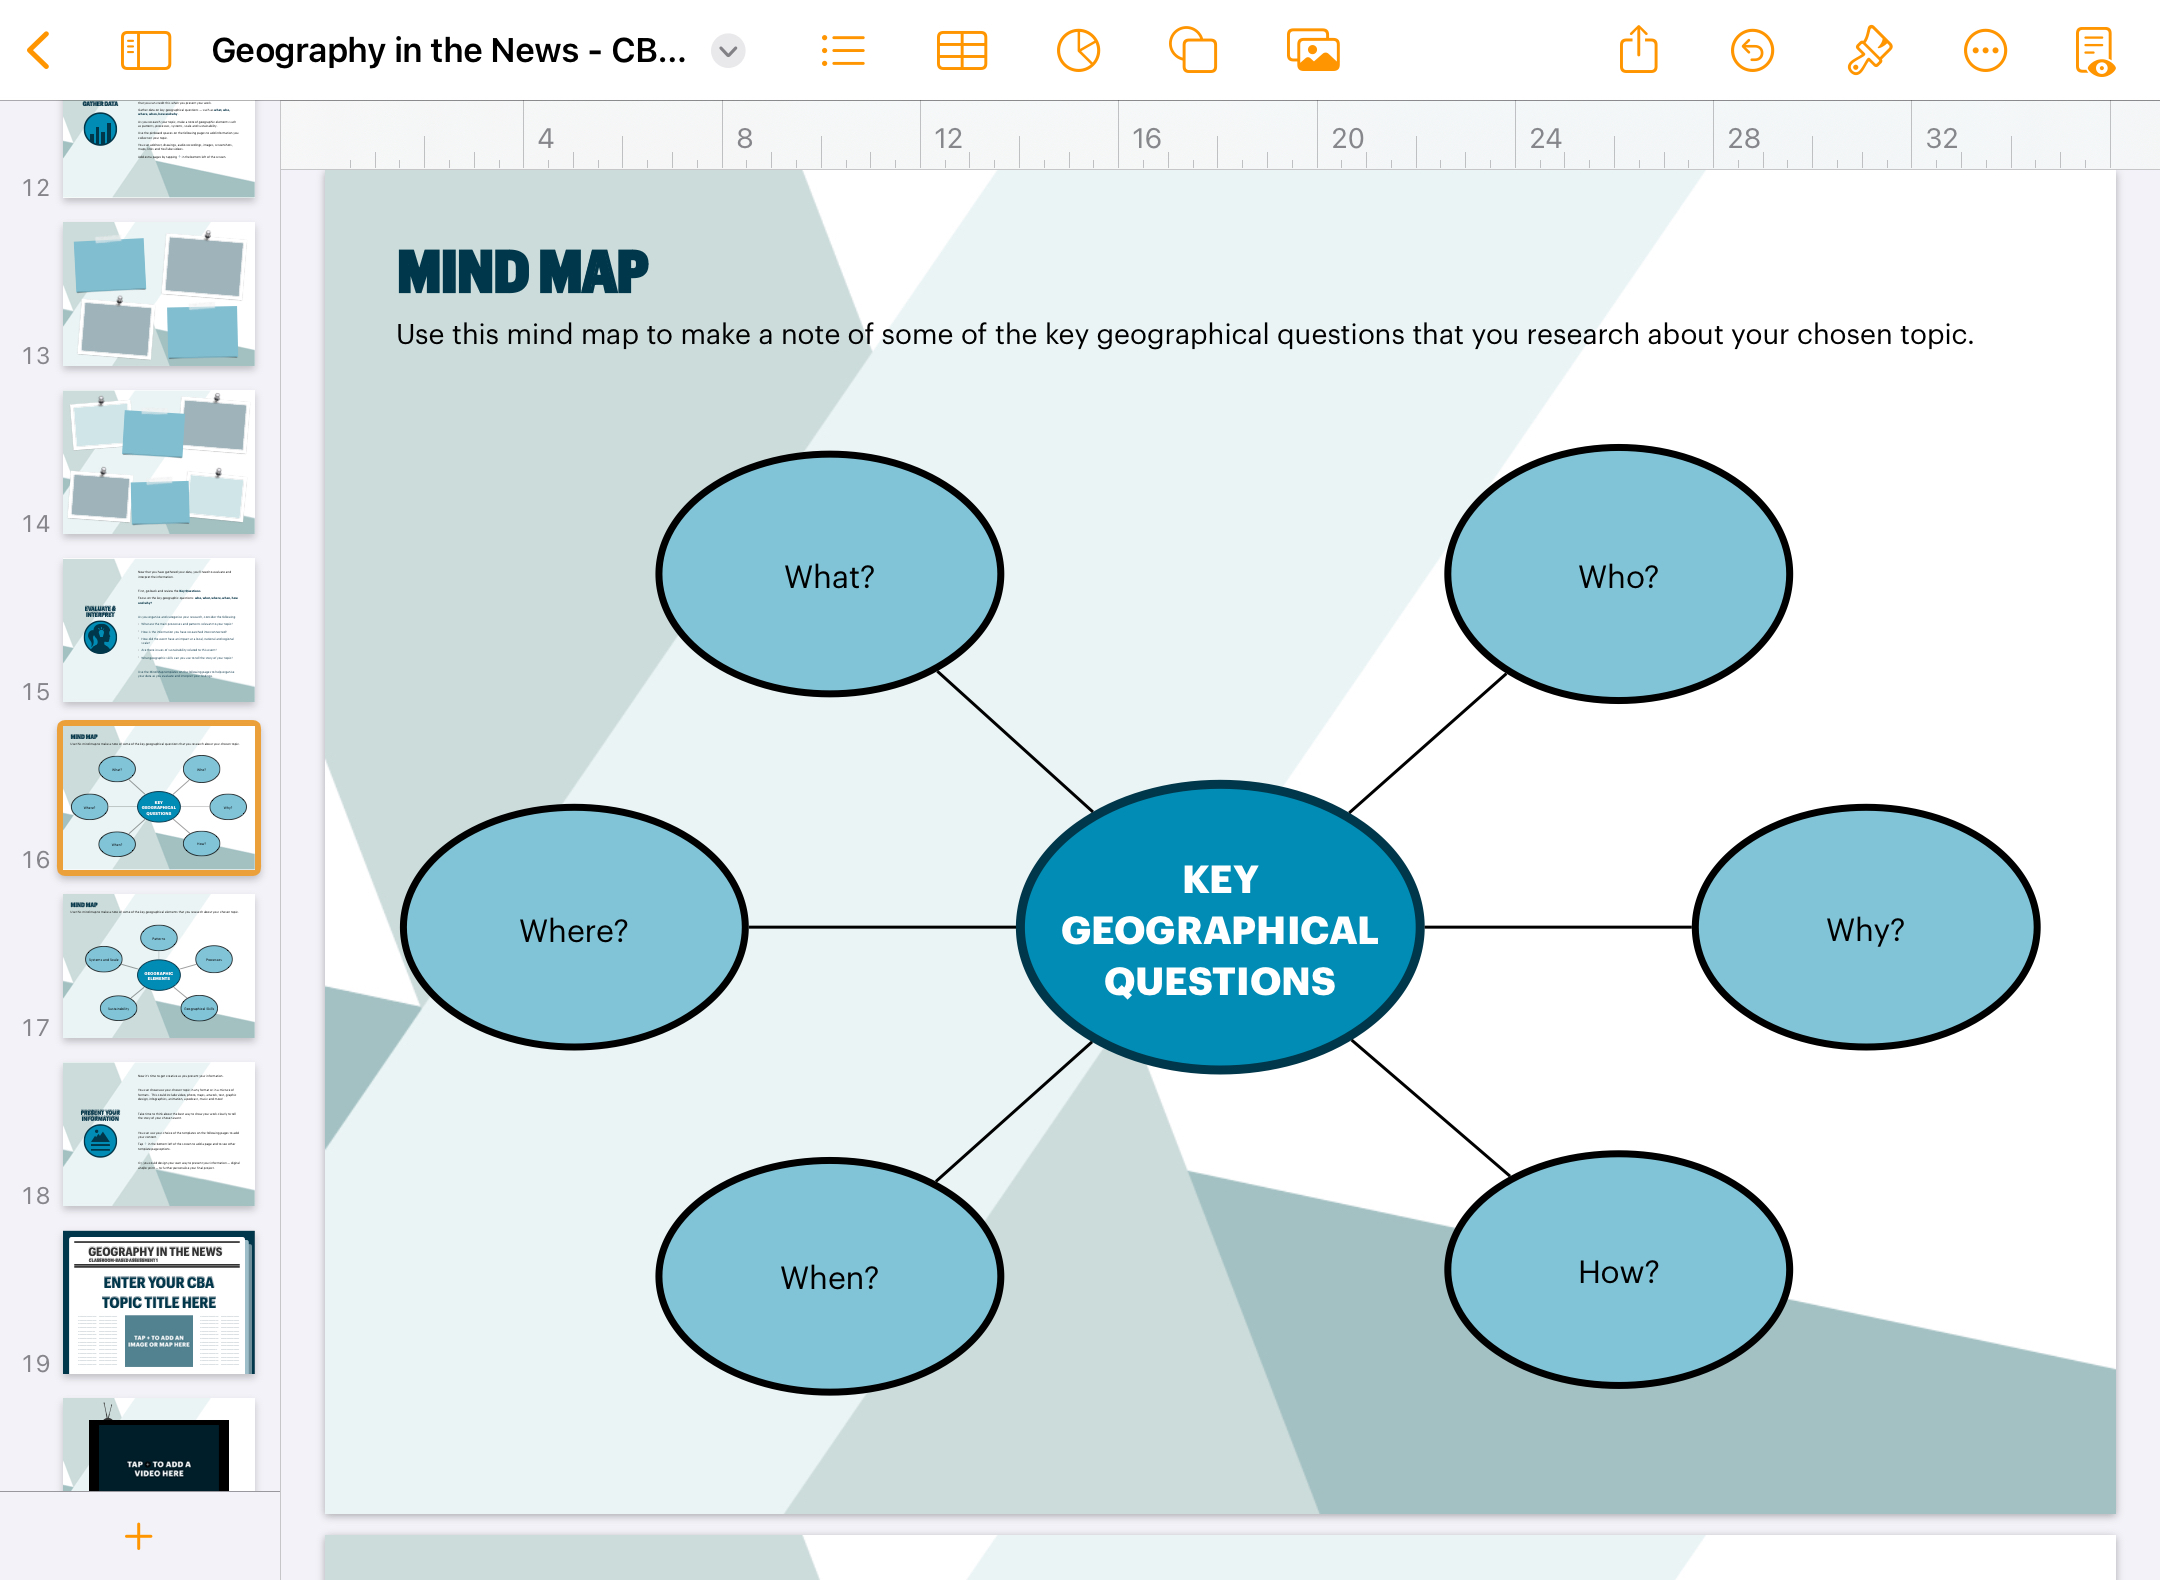 Screenshot from ‘Geography in the News’ Pages journal showing a blank mind map page, focussed on key geographical questions.